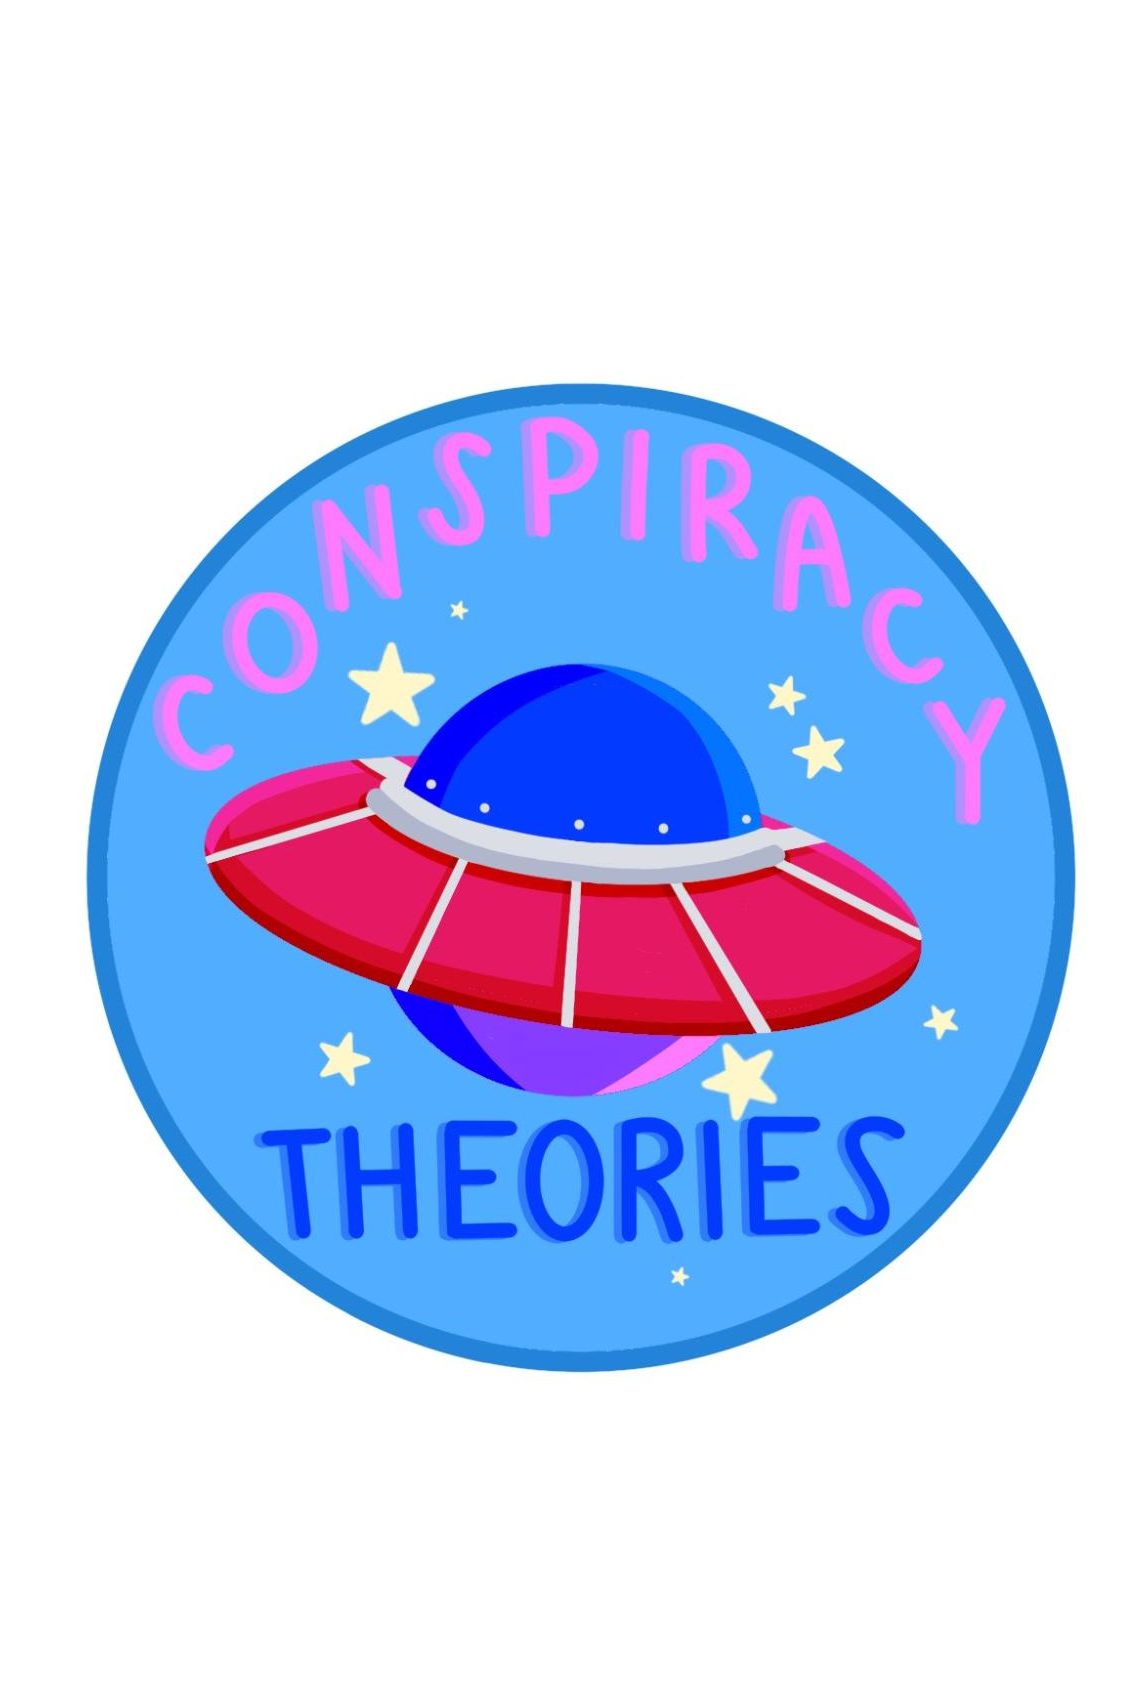 What are conspiracy theories?